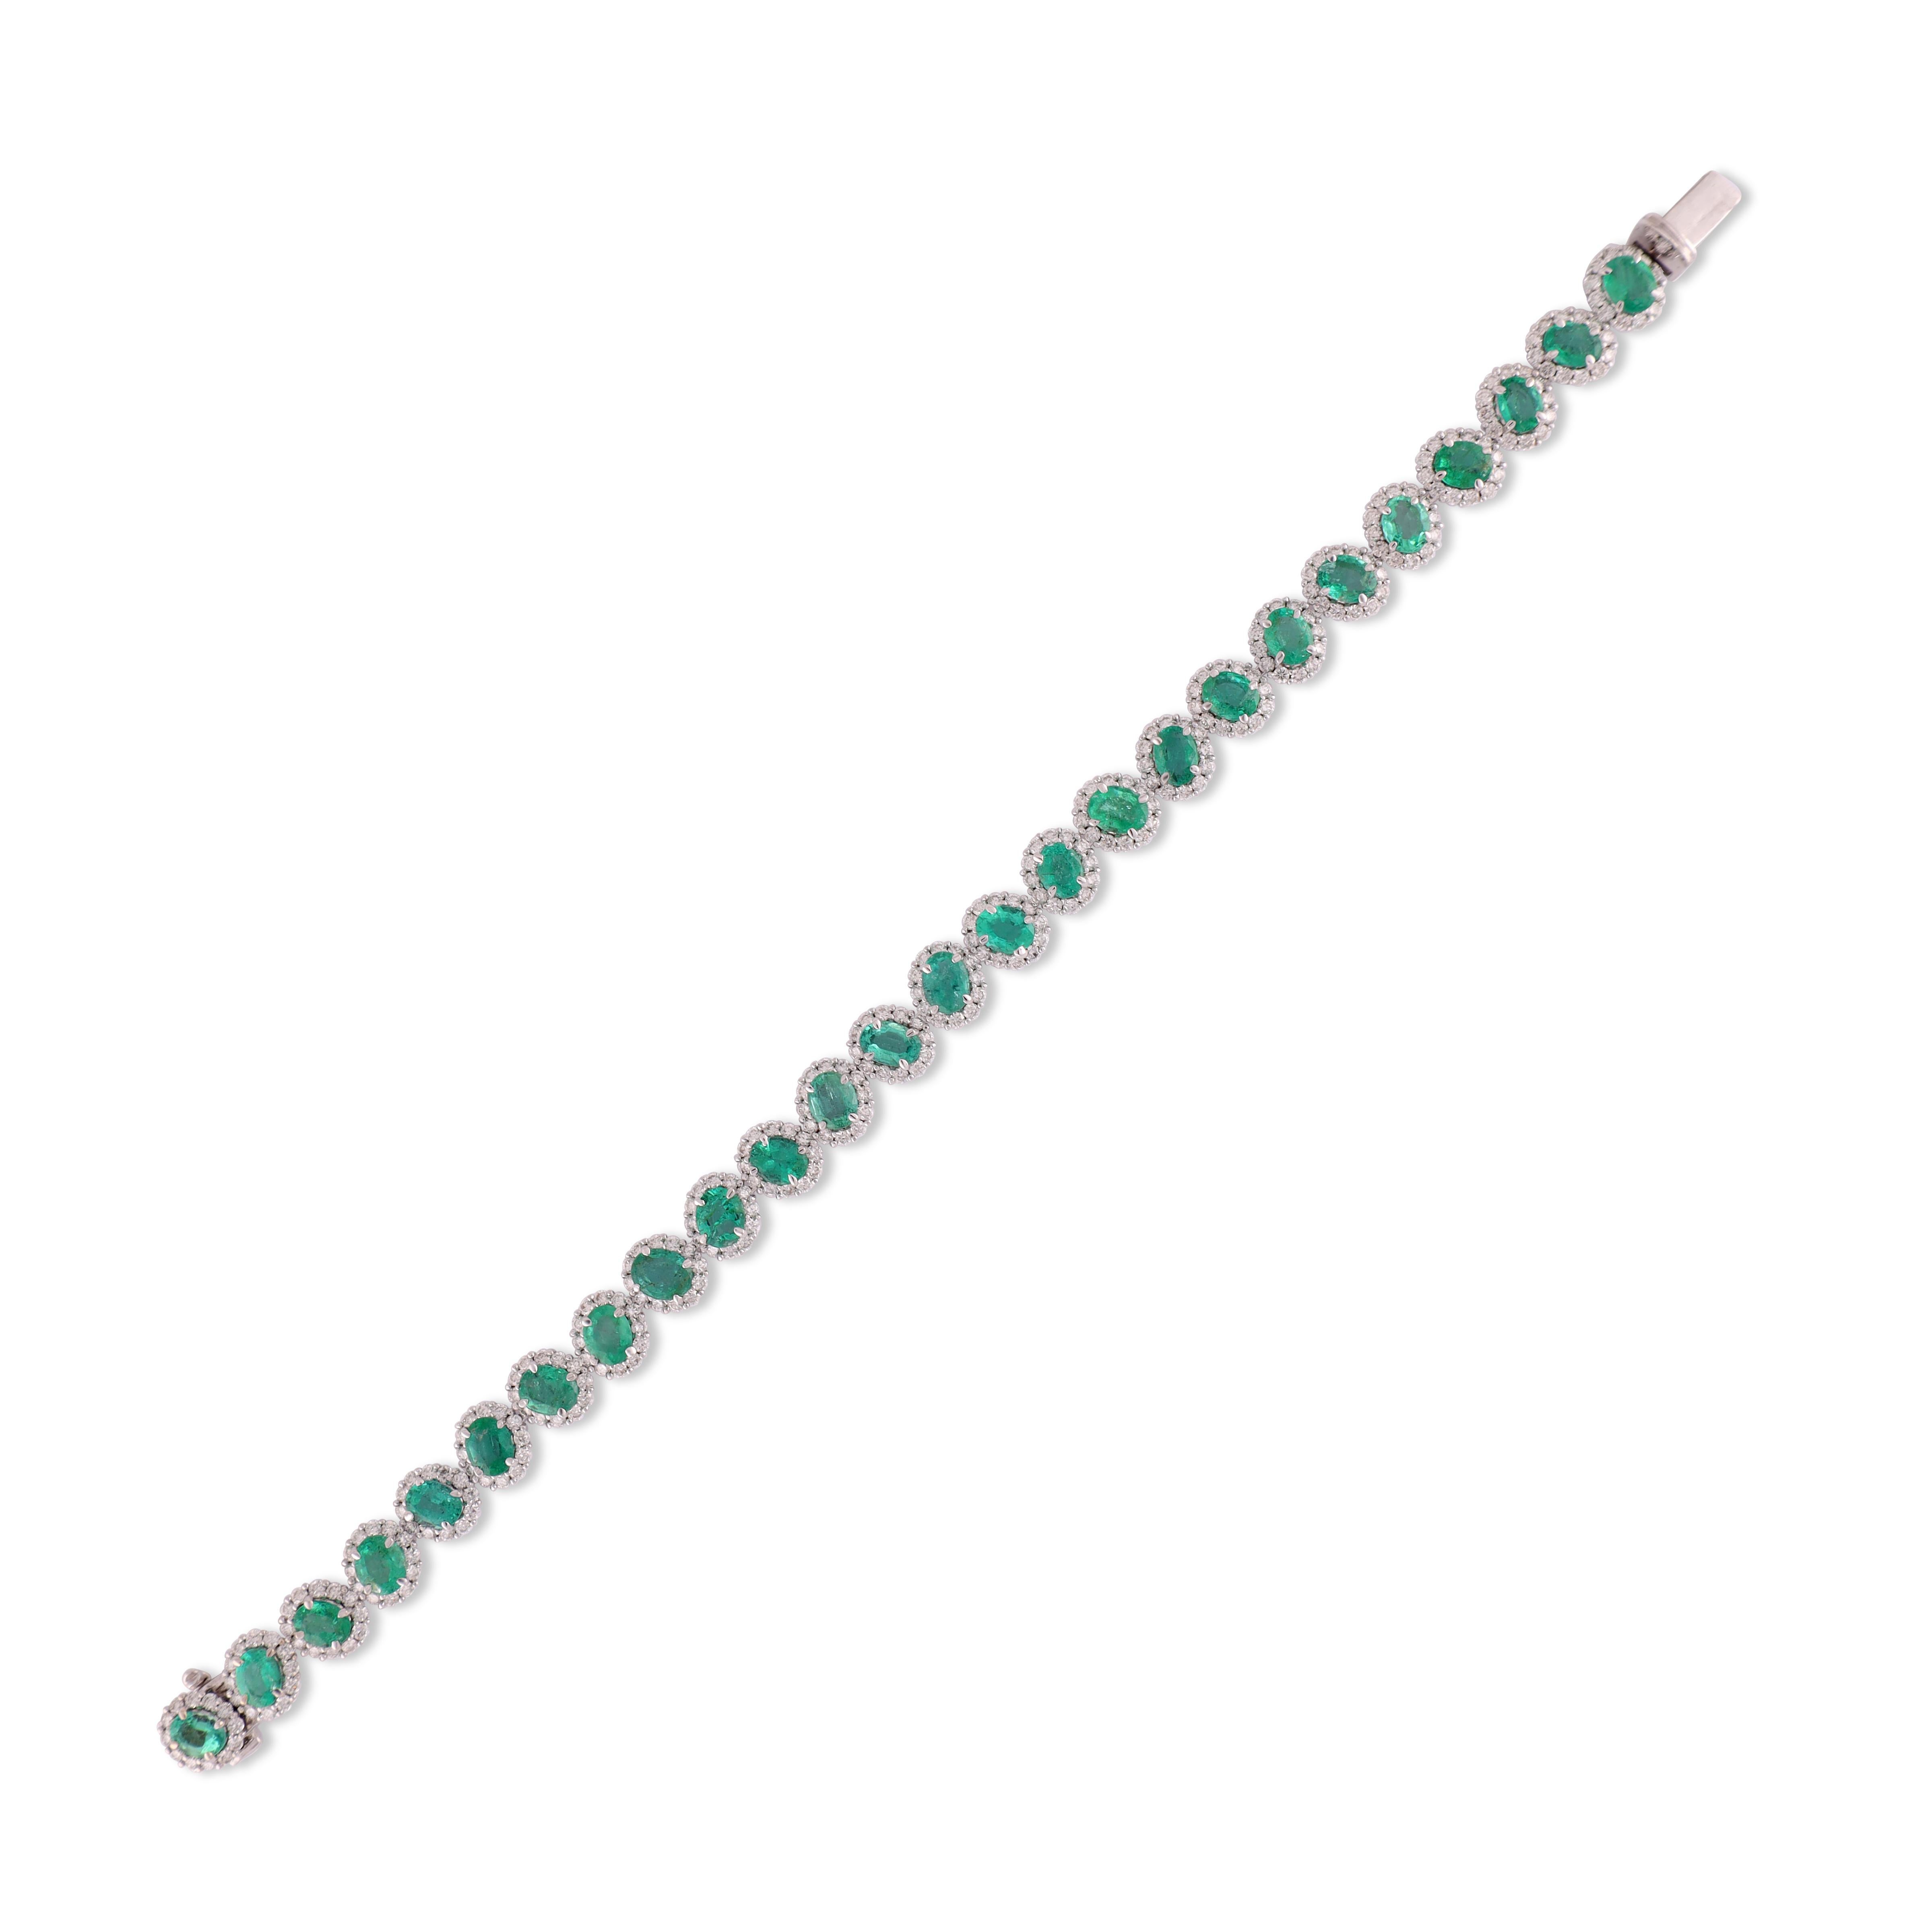 7.49 Carat Emerald and Diamond  Bracelet in 18K White Gold

This magnificent Oval shape Emerald  tennis bracelet is incredulous. The solitaire Oval-shaped Oval-cut Emerald 
 are beautifully With  Diamonds making the bracelet more graceful and adding